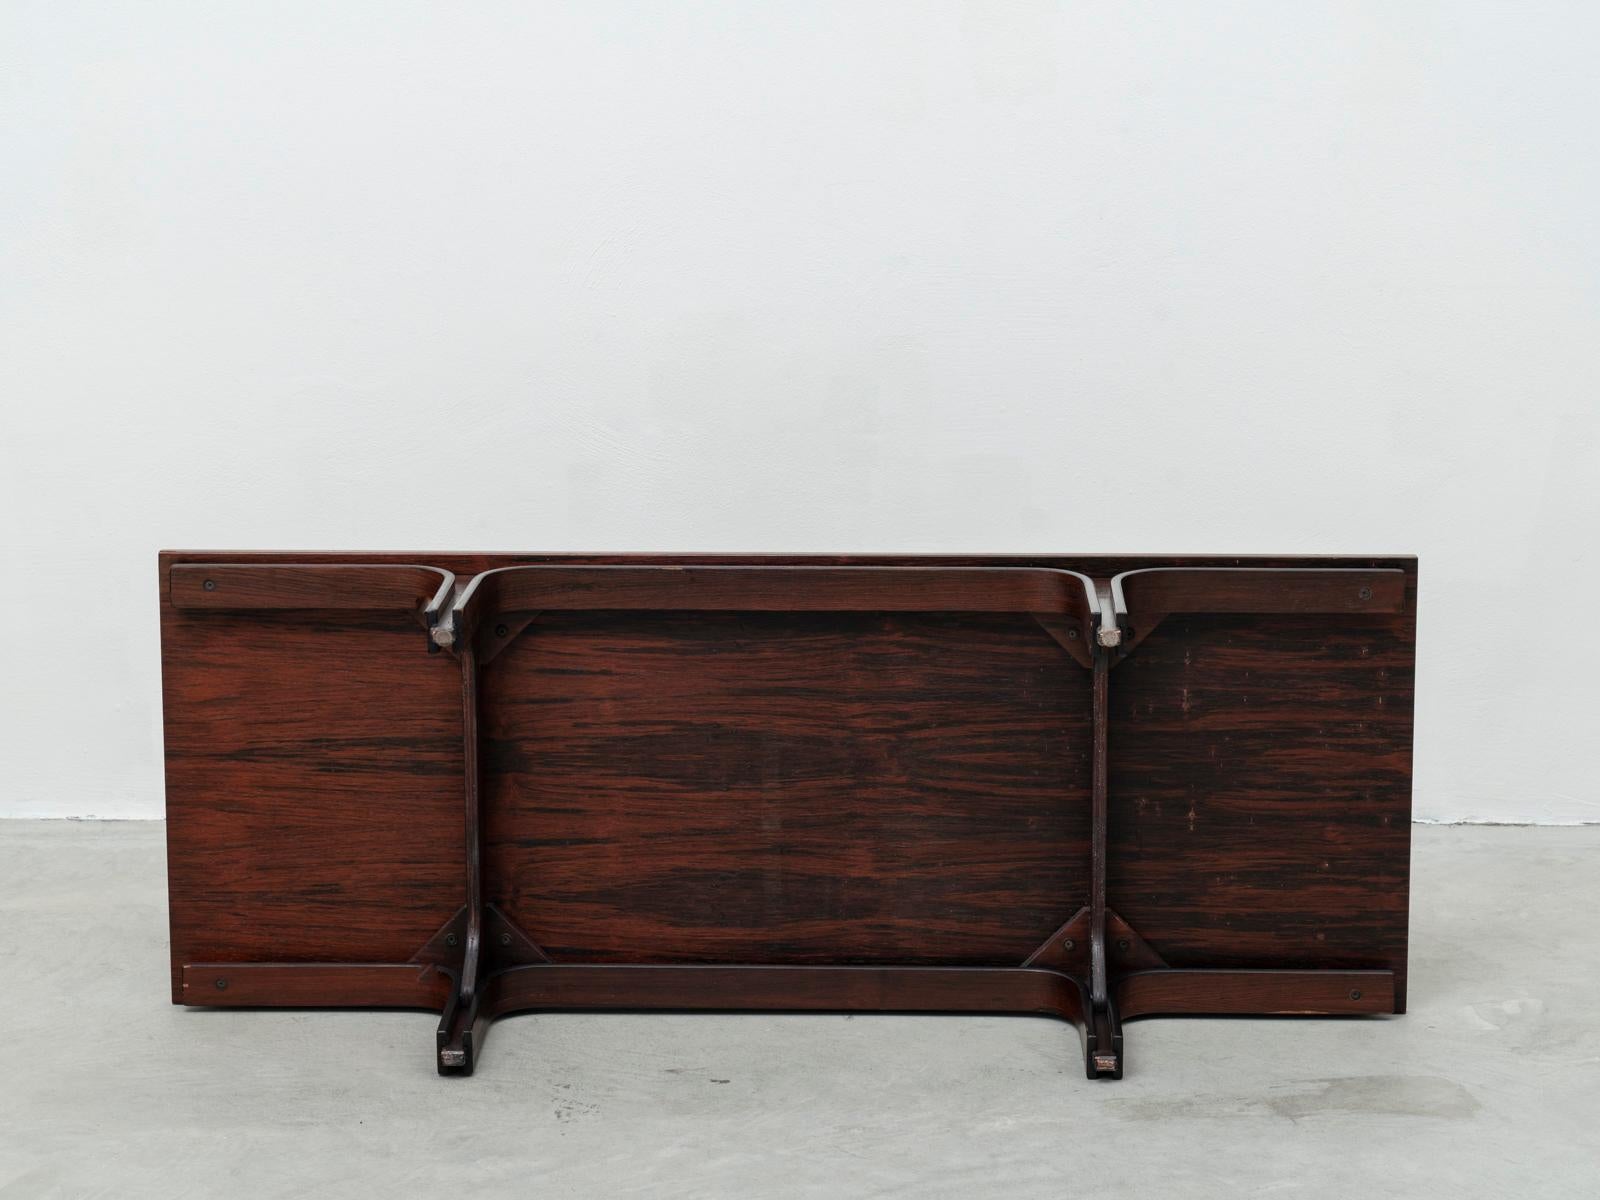 Gianfranco Frattini Midcentury Mod 514 Large Rosewood Low Table for Bernini 1956 For Sale 1